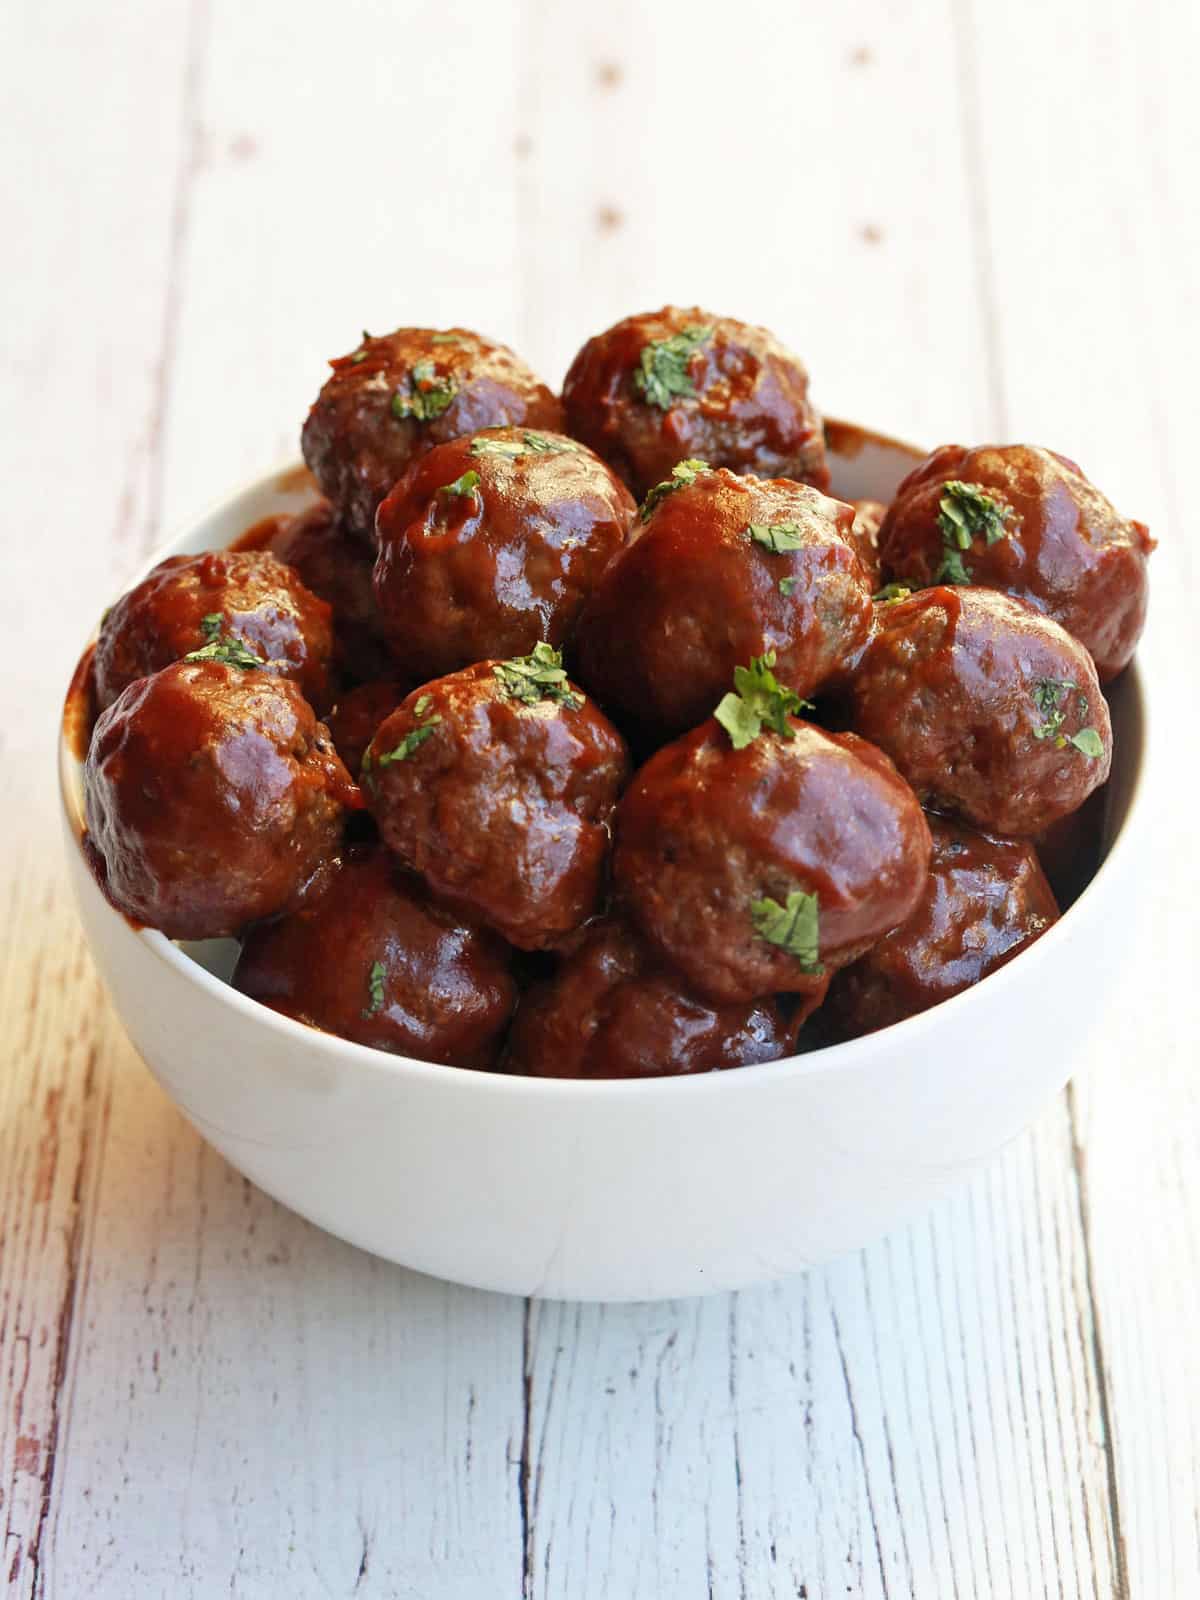 Sweet and sour meatballs are served in a white bowl.